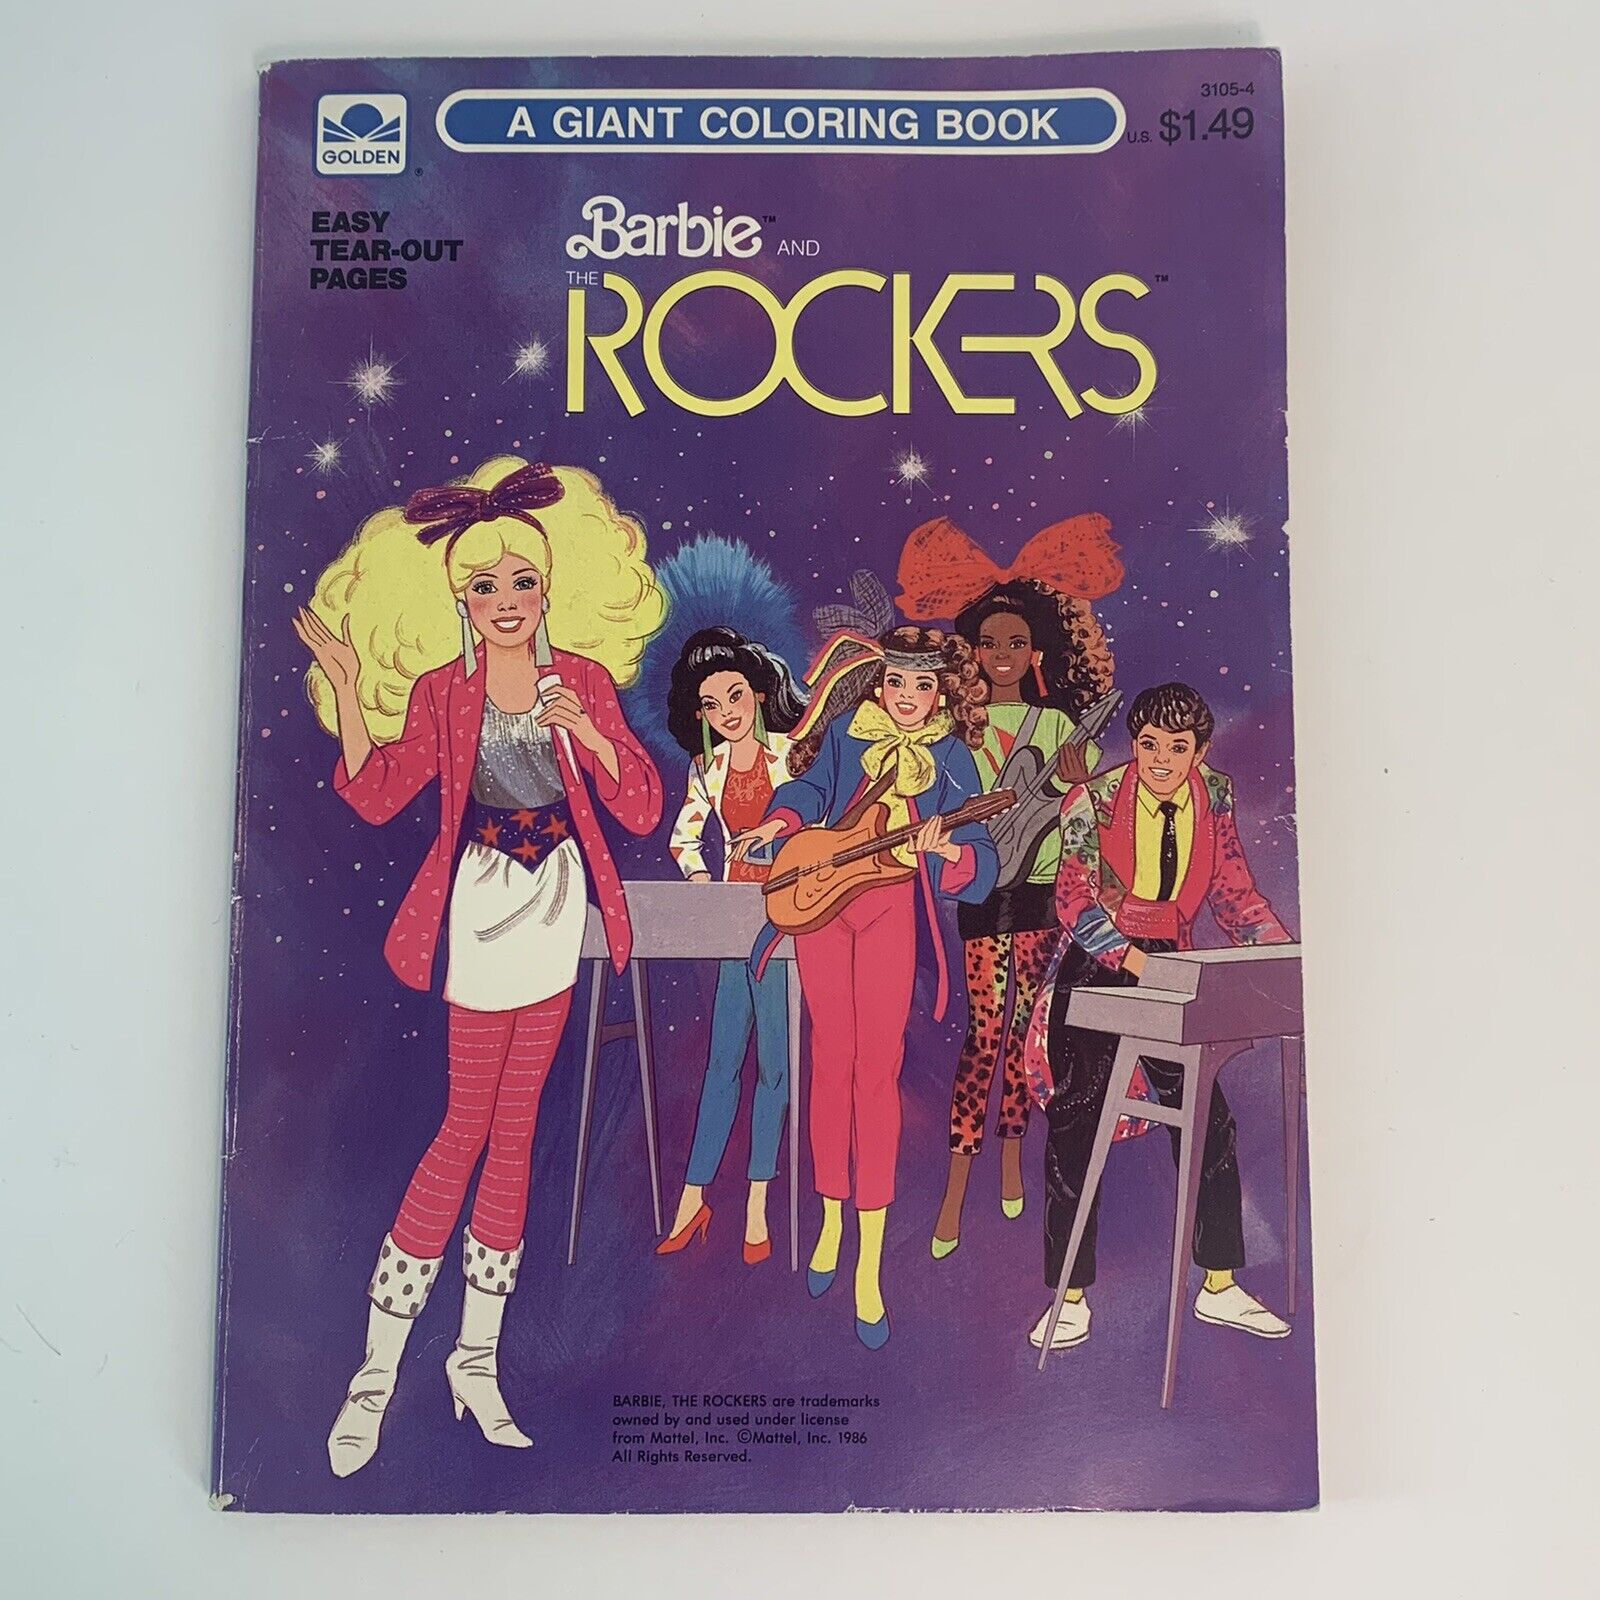 Vintage Golden 1986 Barbie and the Rockers Coloring Book Paperba